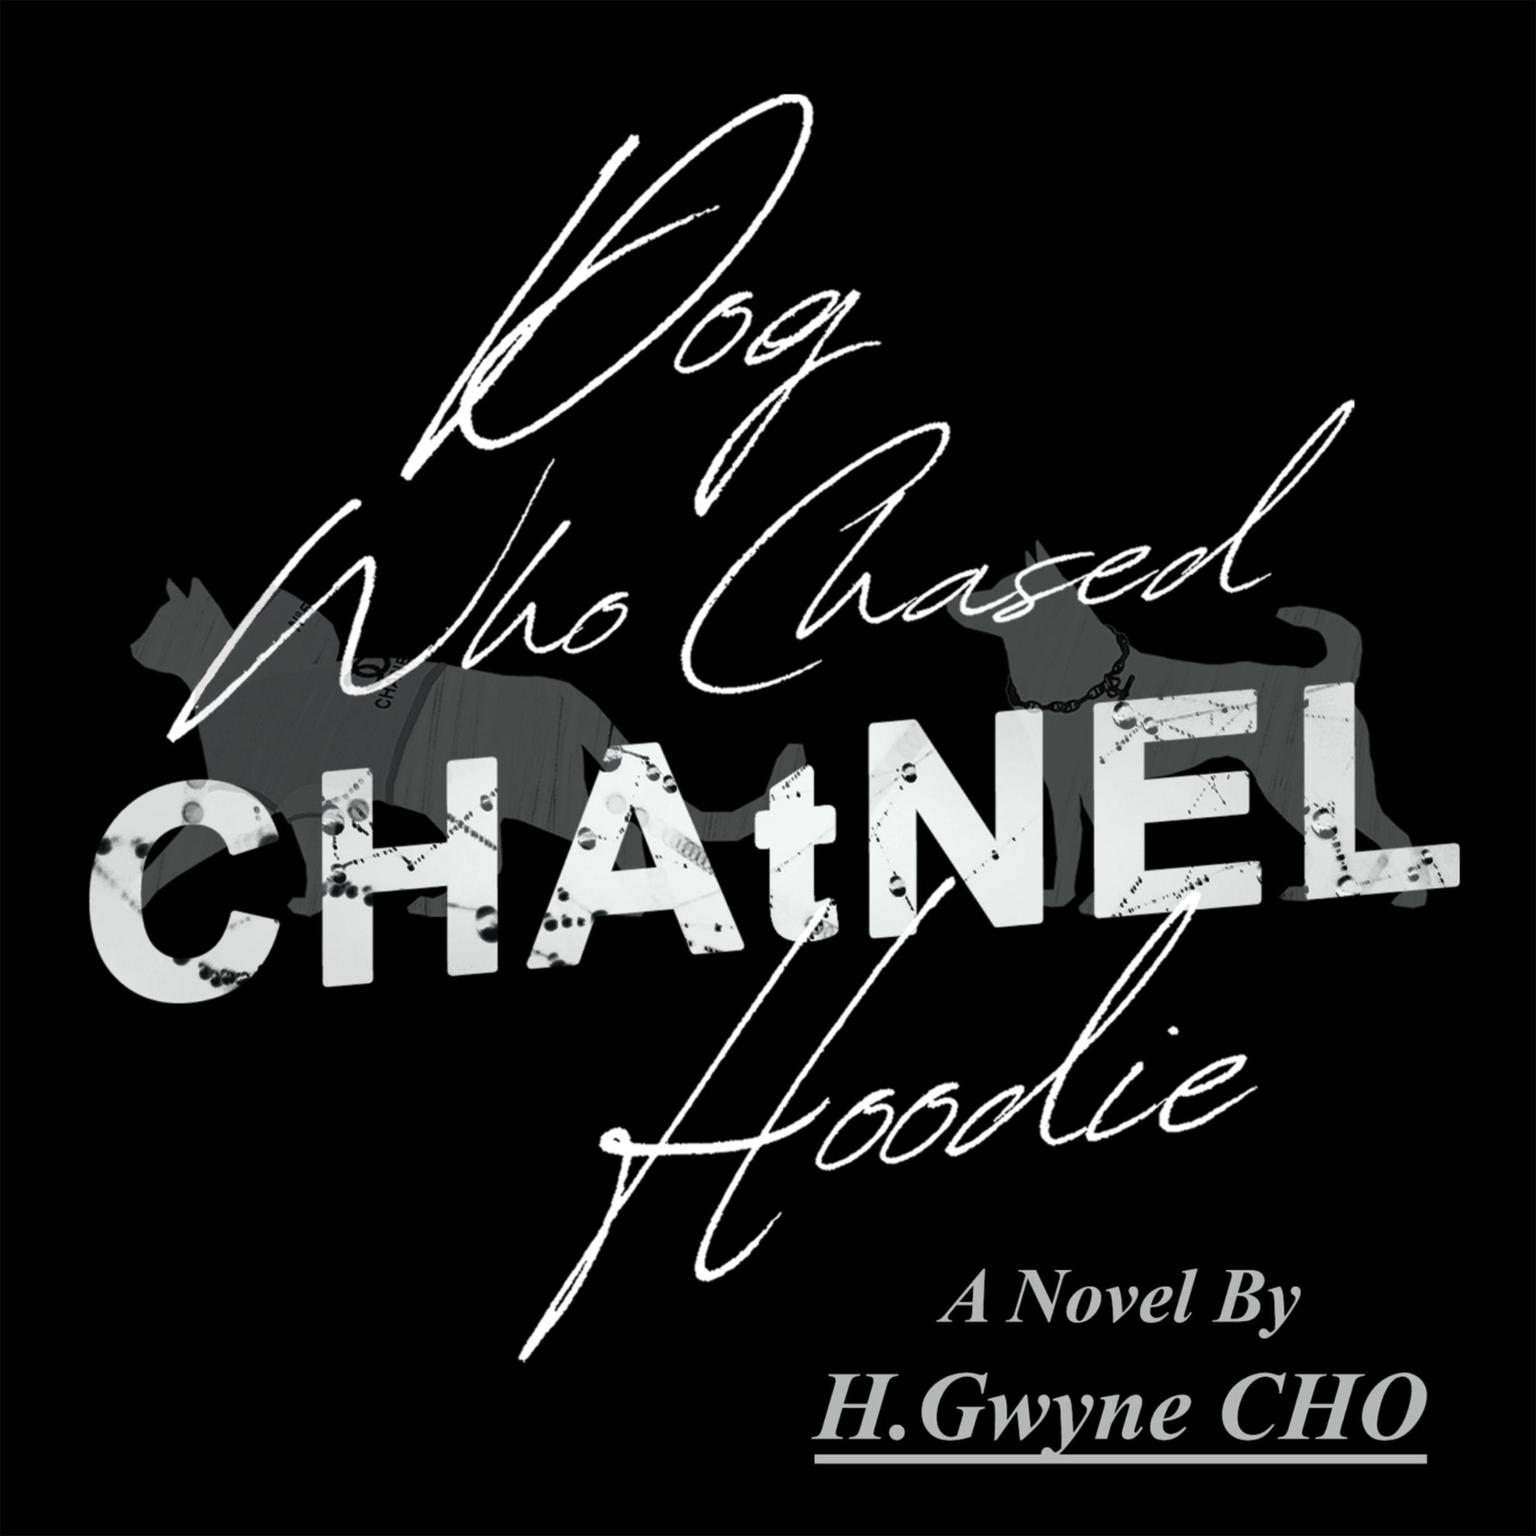 Dog Who Chased CHAtNEL Hoodie Audiobook, by H.Gwyne CHO